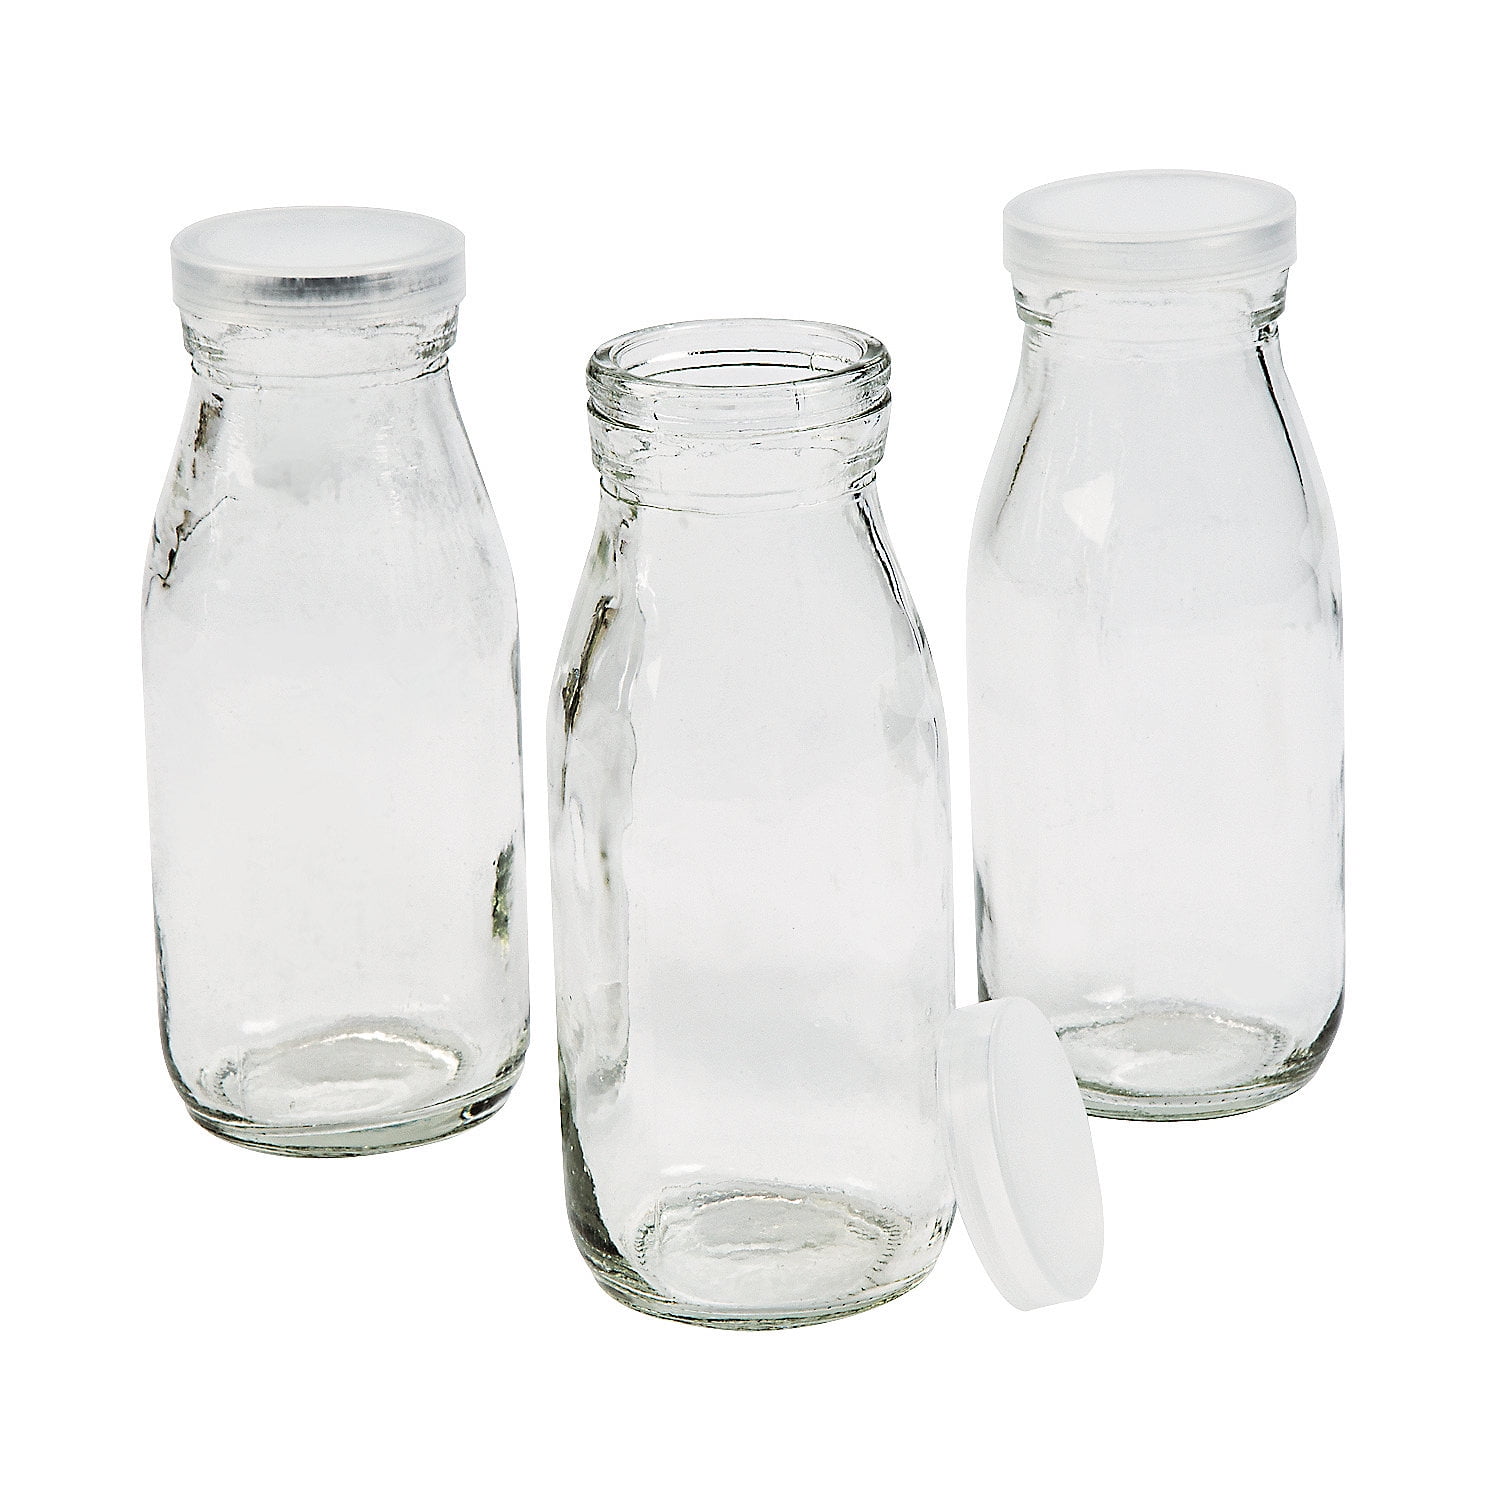 Liter Glass Milk Bottle with Lid (4 Pack) 32 oz Jugs and 8 White Caps, Reusable Food Grade Milk Container for Refrigerator, Bottles for Juice, Oat